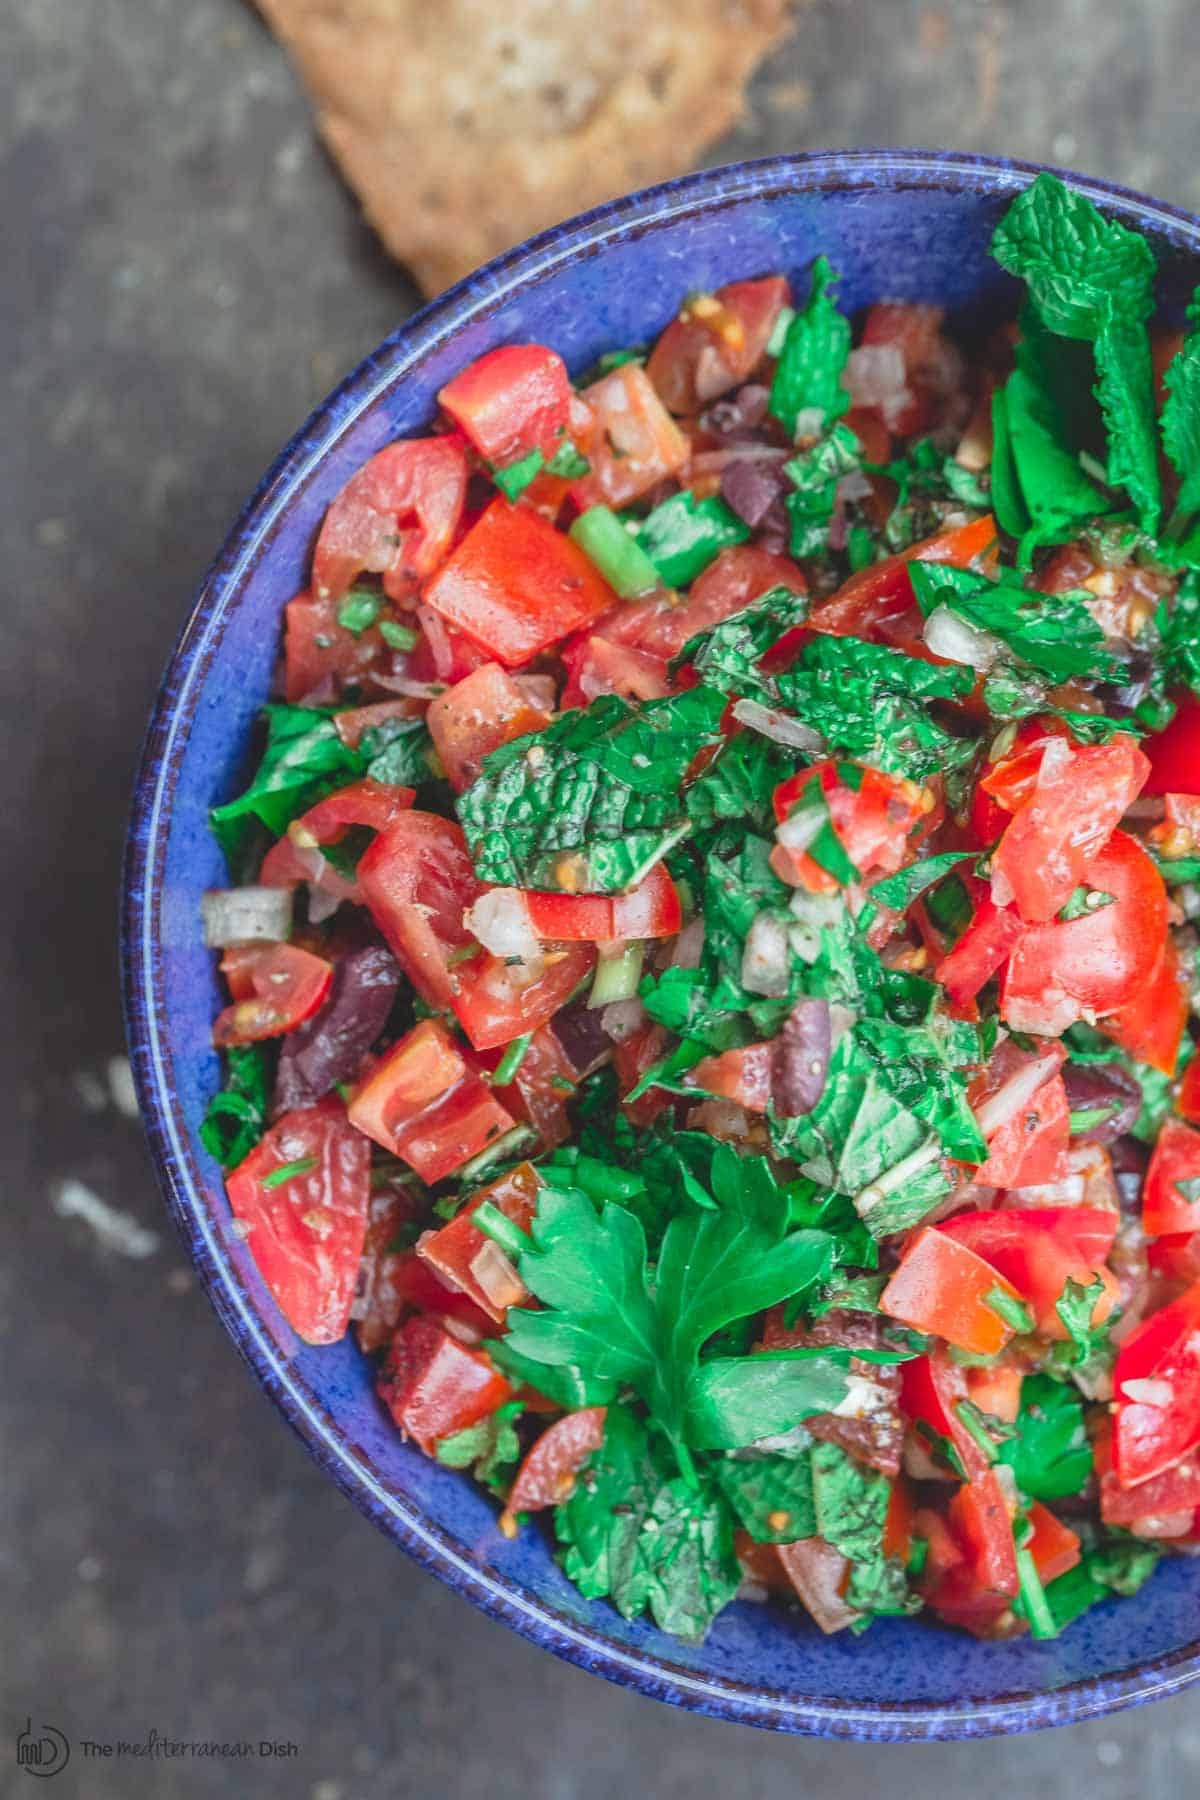 Homemade salsa with chopped tomatoes, onions, parsley and mint, served in a blue bowl